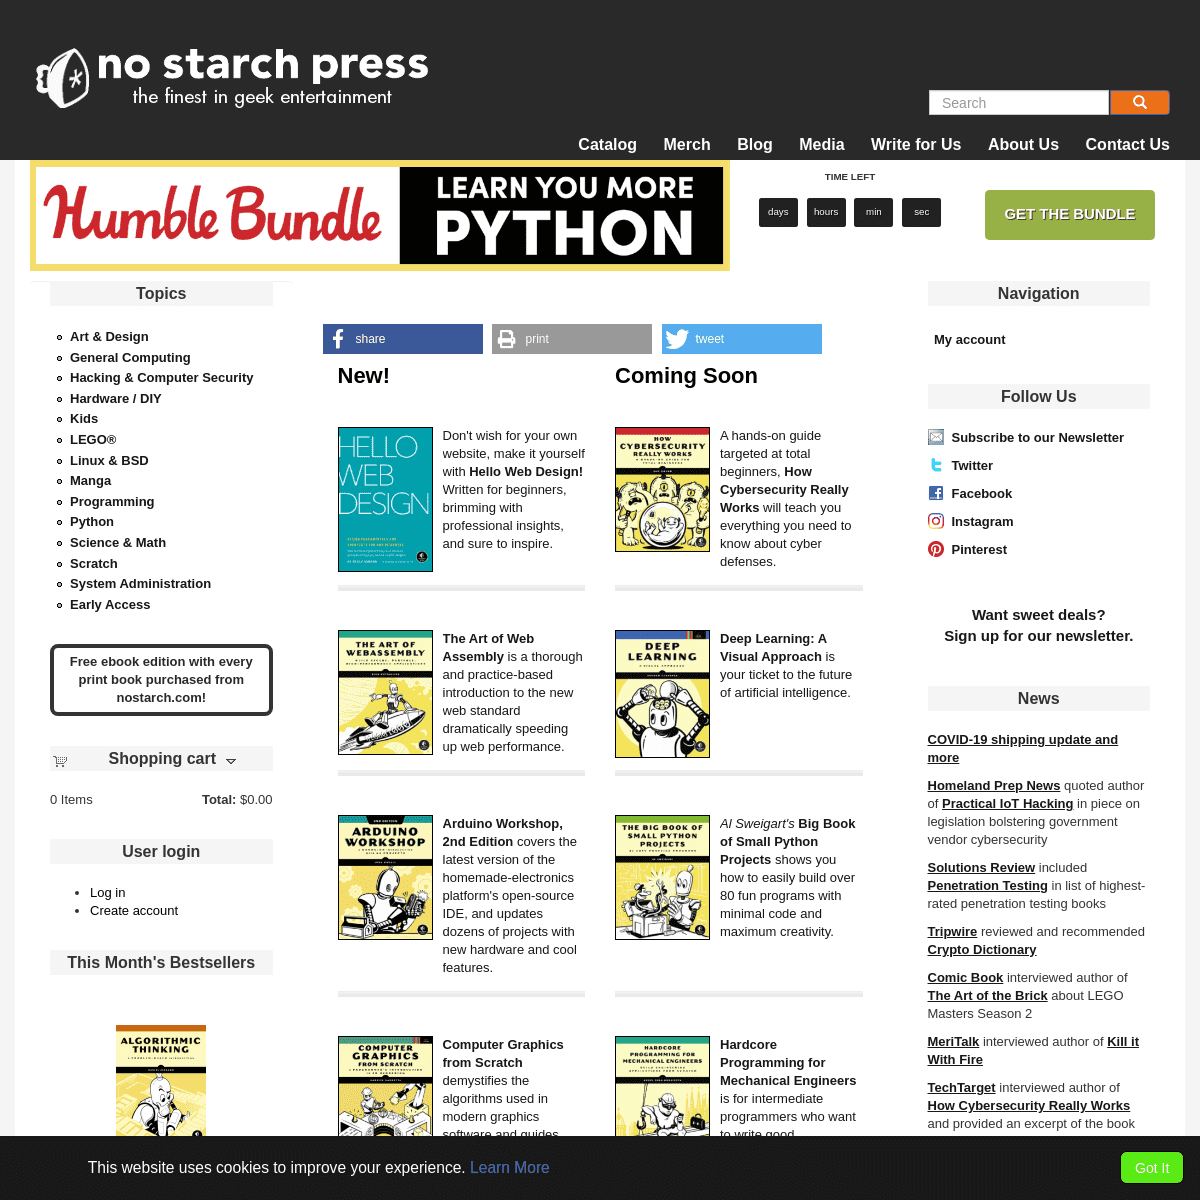 A complete backup of https://nostarch.com